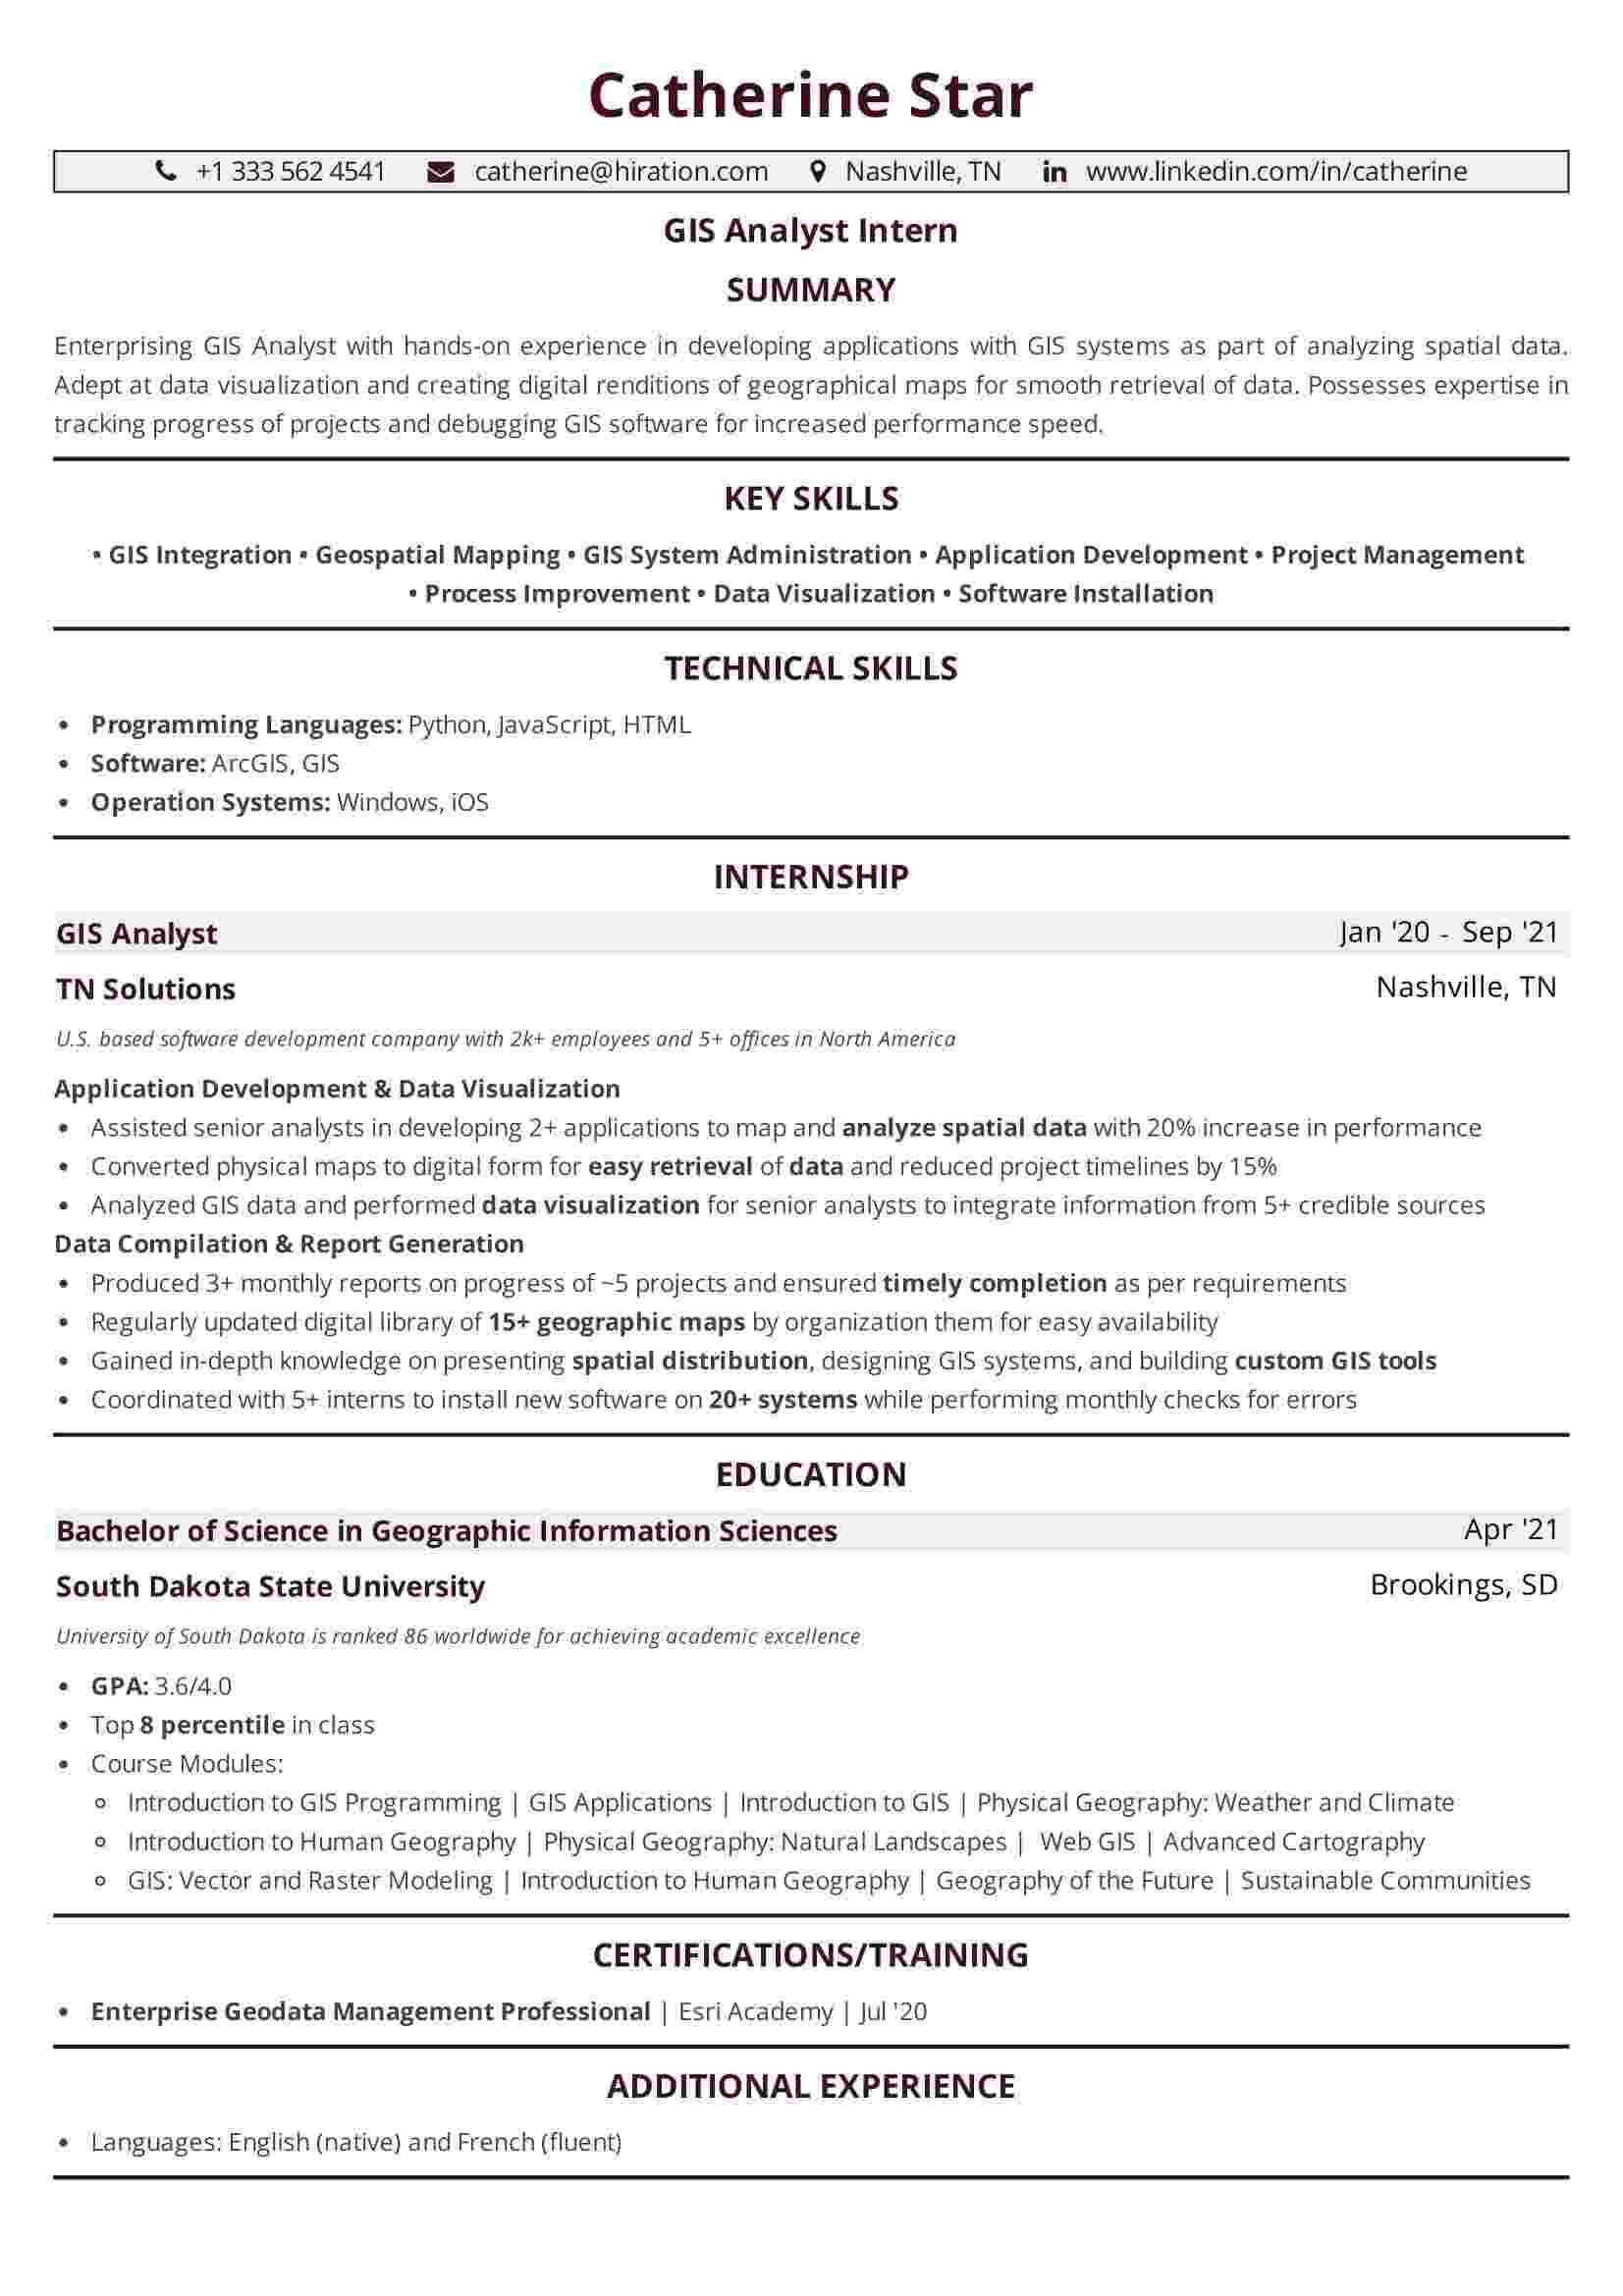 Business Analyst Resume with Gis Samples Gis Resume Examples: 2022 Guide to Perfect Yours today!